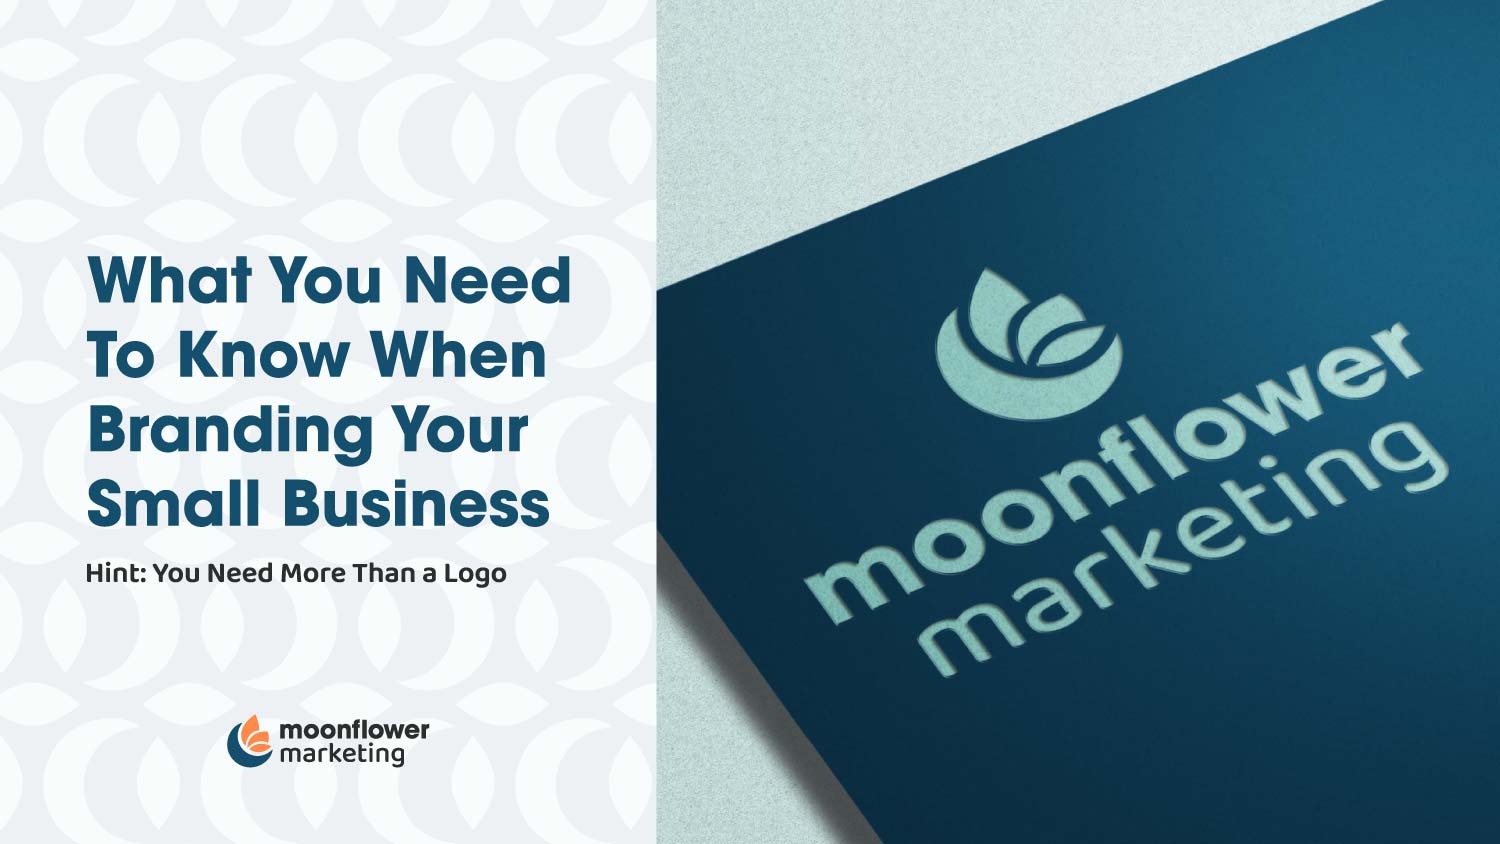 What you need to know when branding your small business